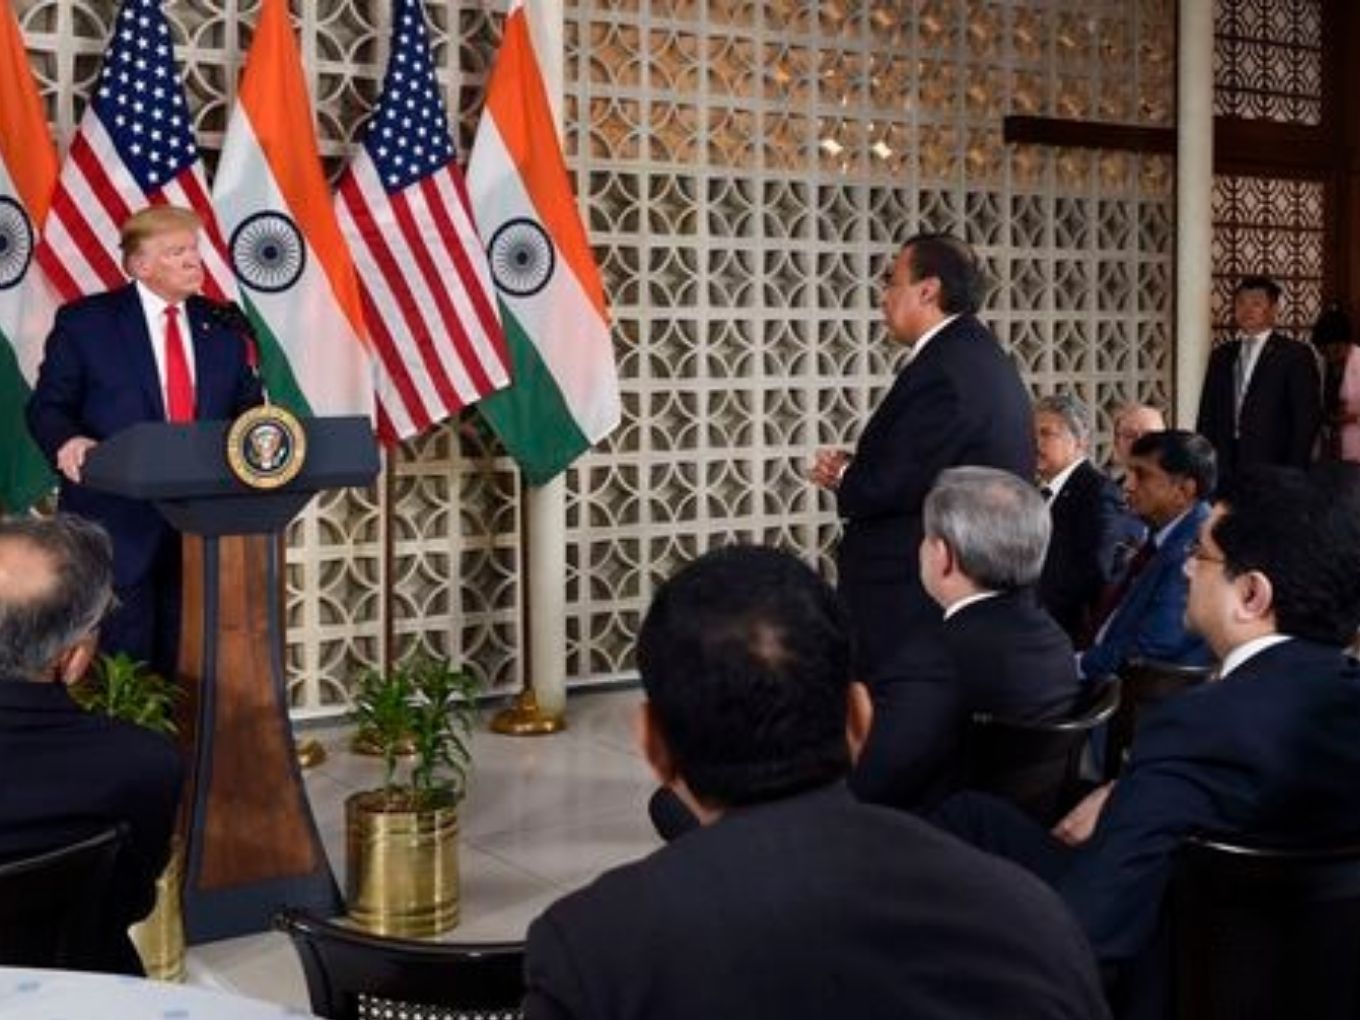 We Don’t Use Chinese Components For Reliance Jio, Ambani told Trump